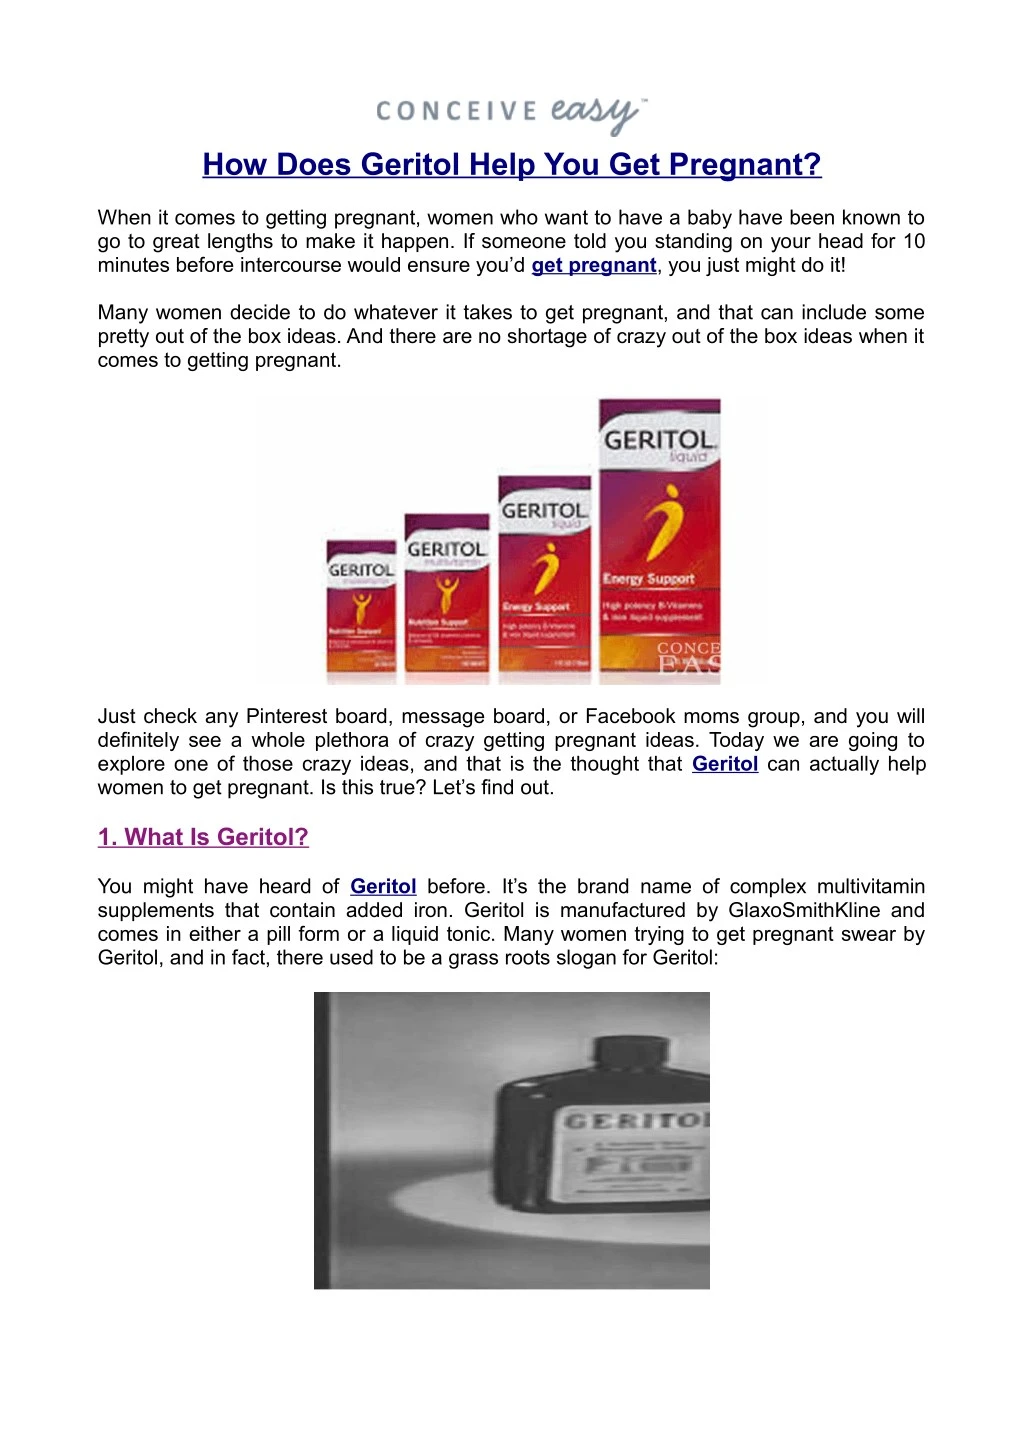 how does geritol help you get pregnant